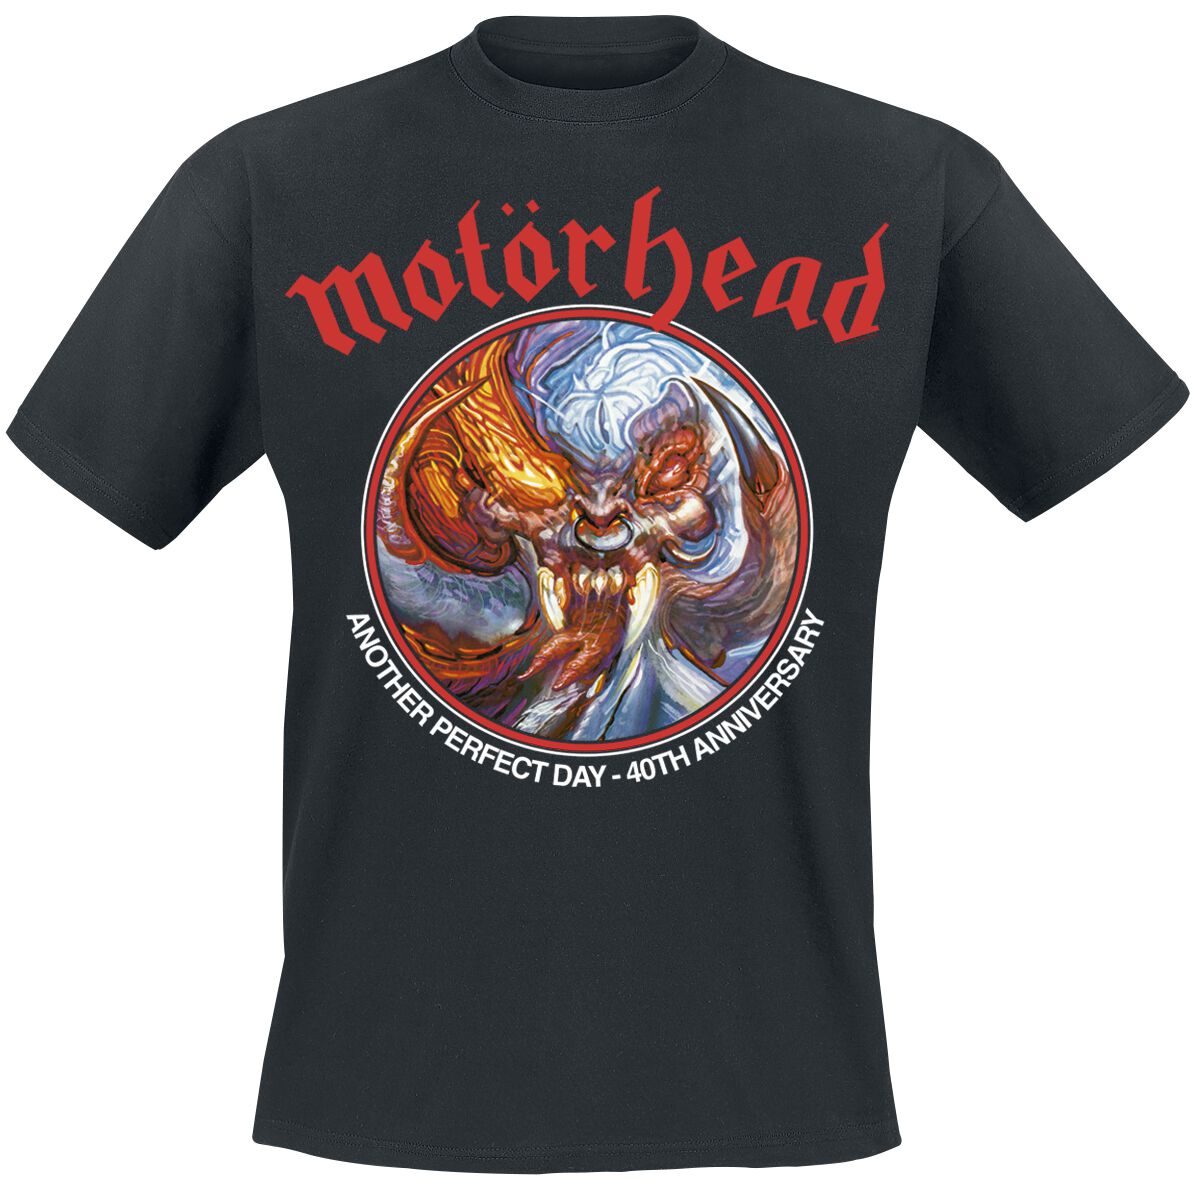 Motörhead Another Perfect Day Anniversary T-Shirt schwarz in S